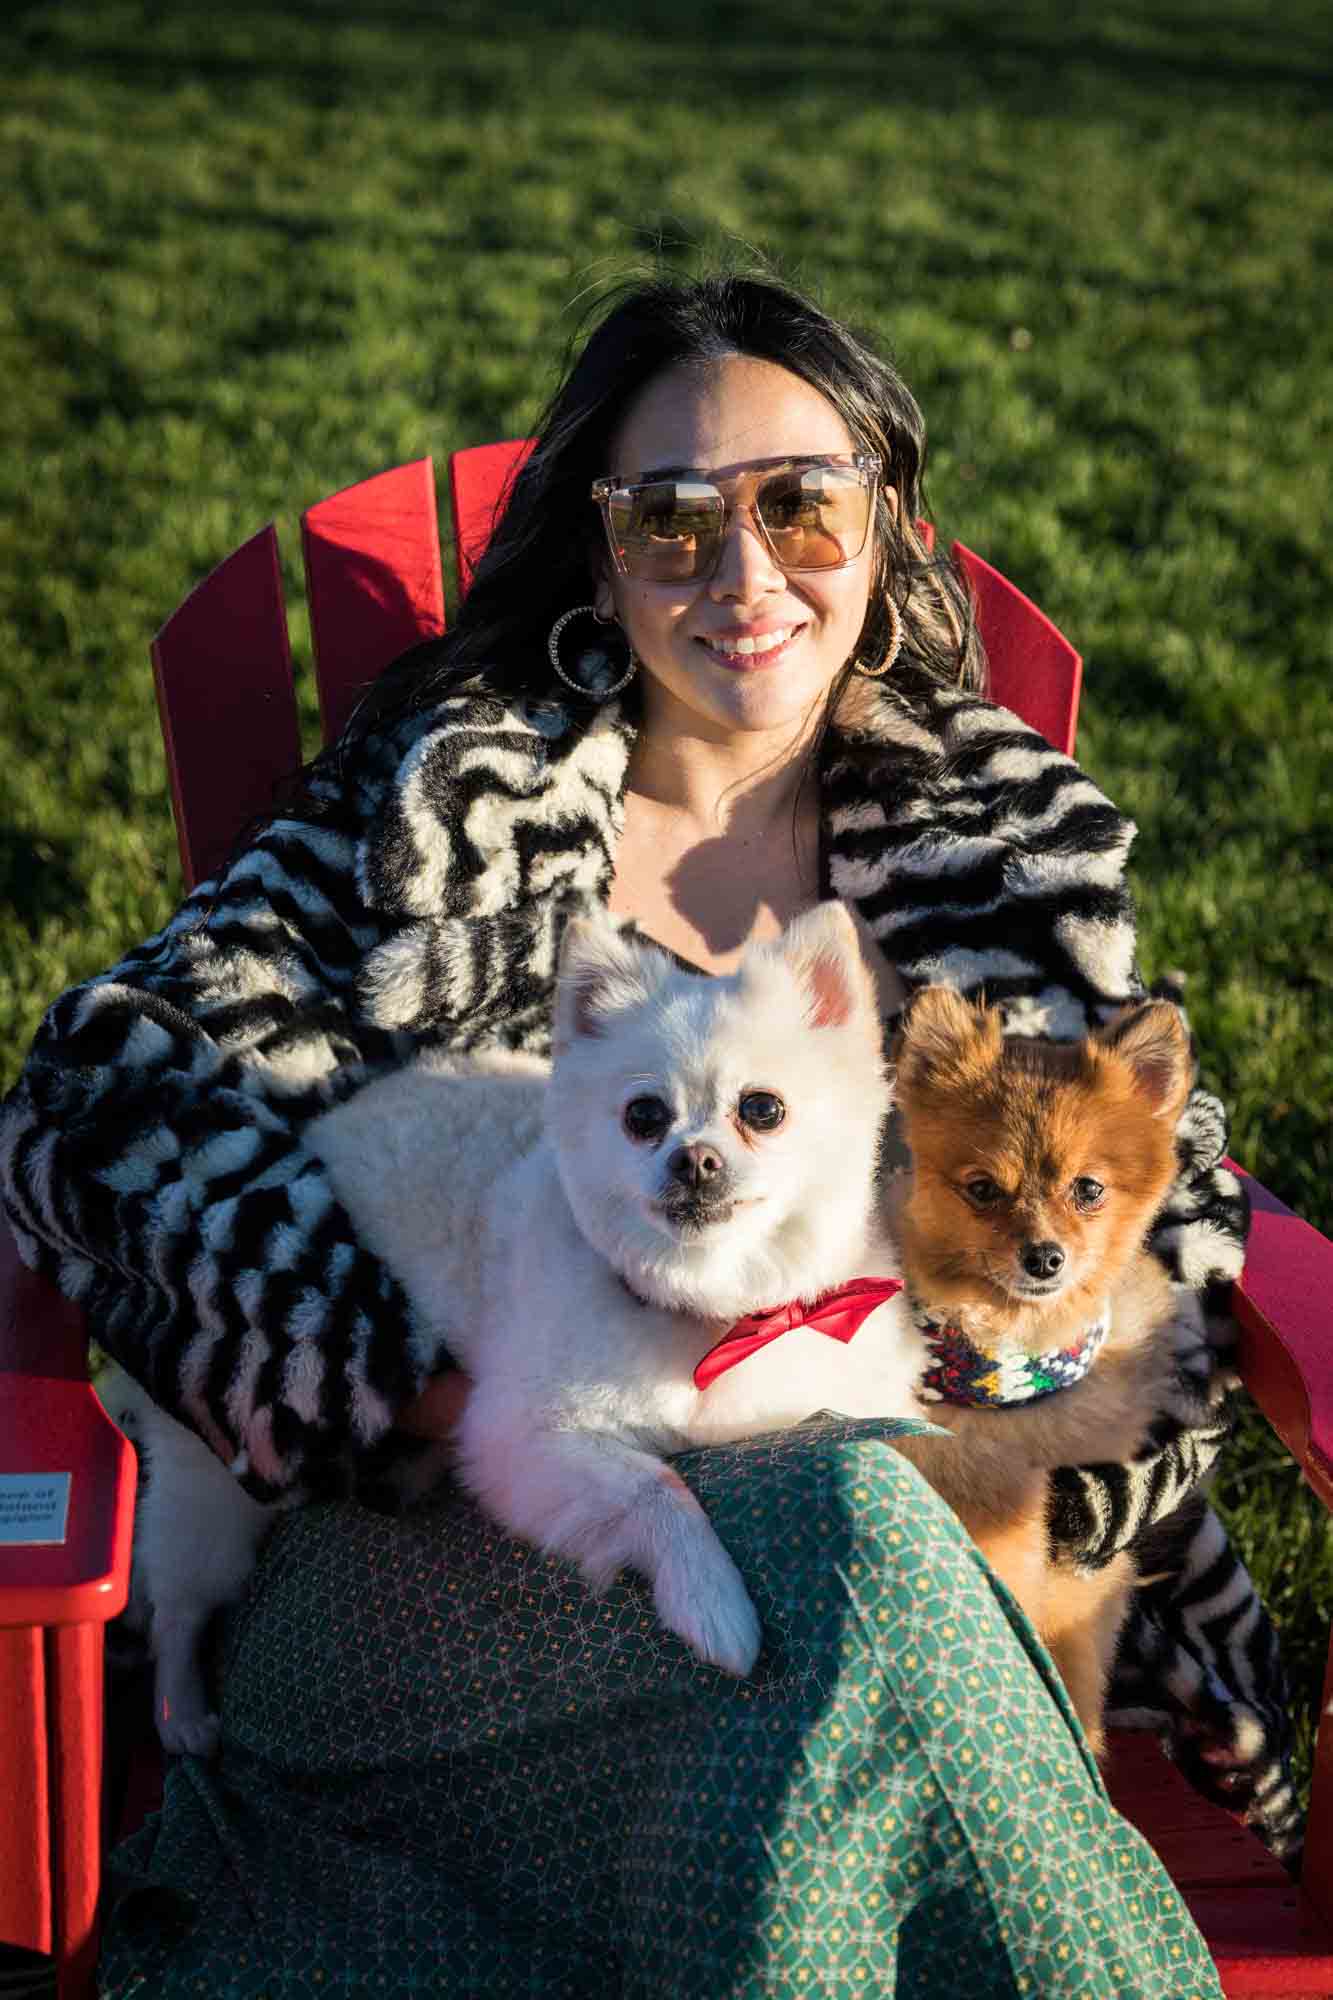 Governors Island pet portrait of woman wearing sunglasses while holding two Pomeranian dogs in red Adirondack chair